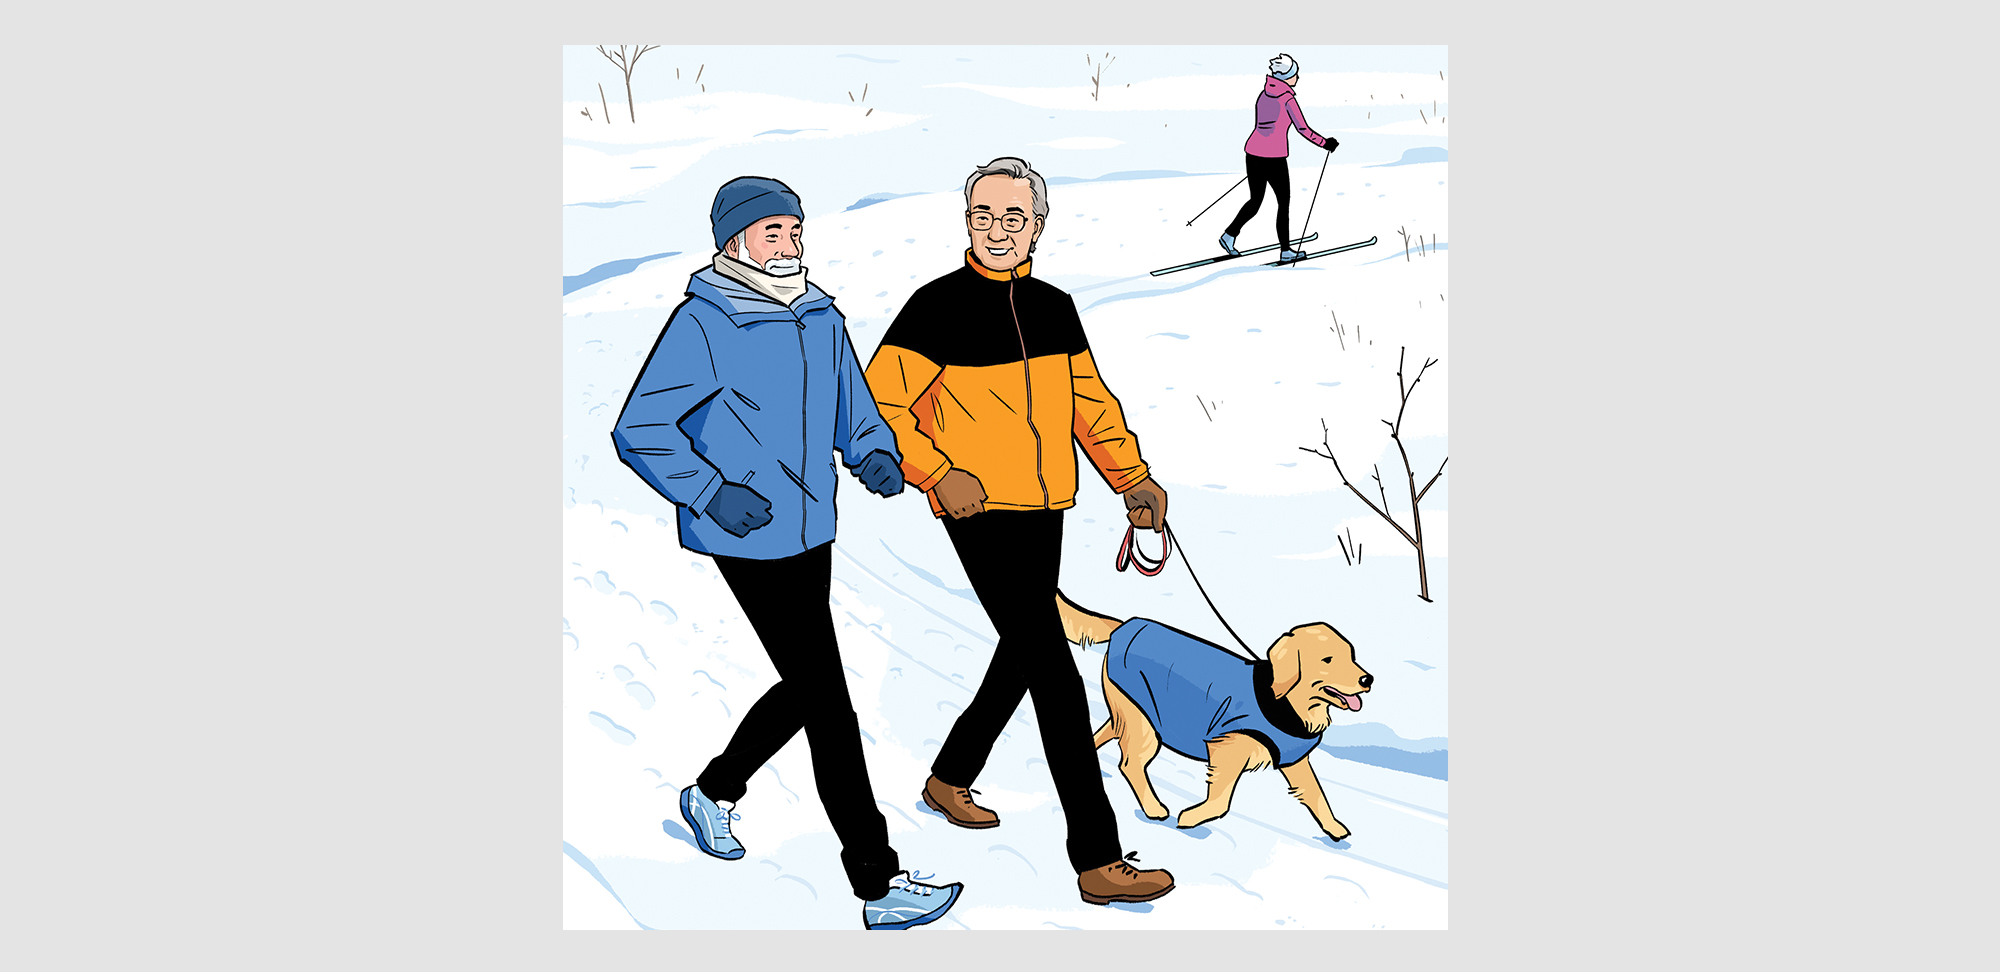 Illustration of two men walking a dog outdoors in the winter, with a cross country skier in the background.